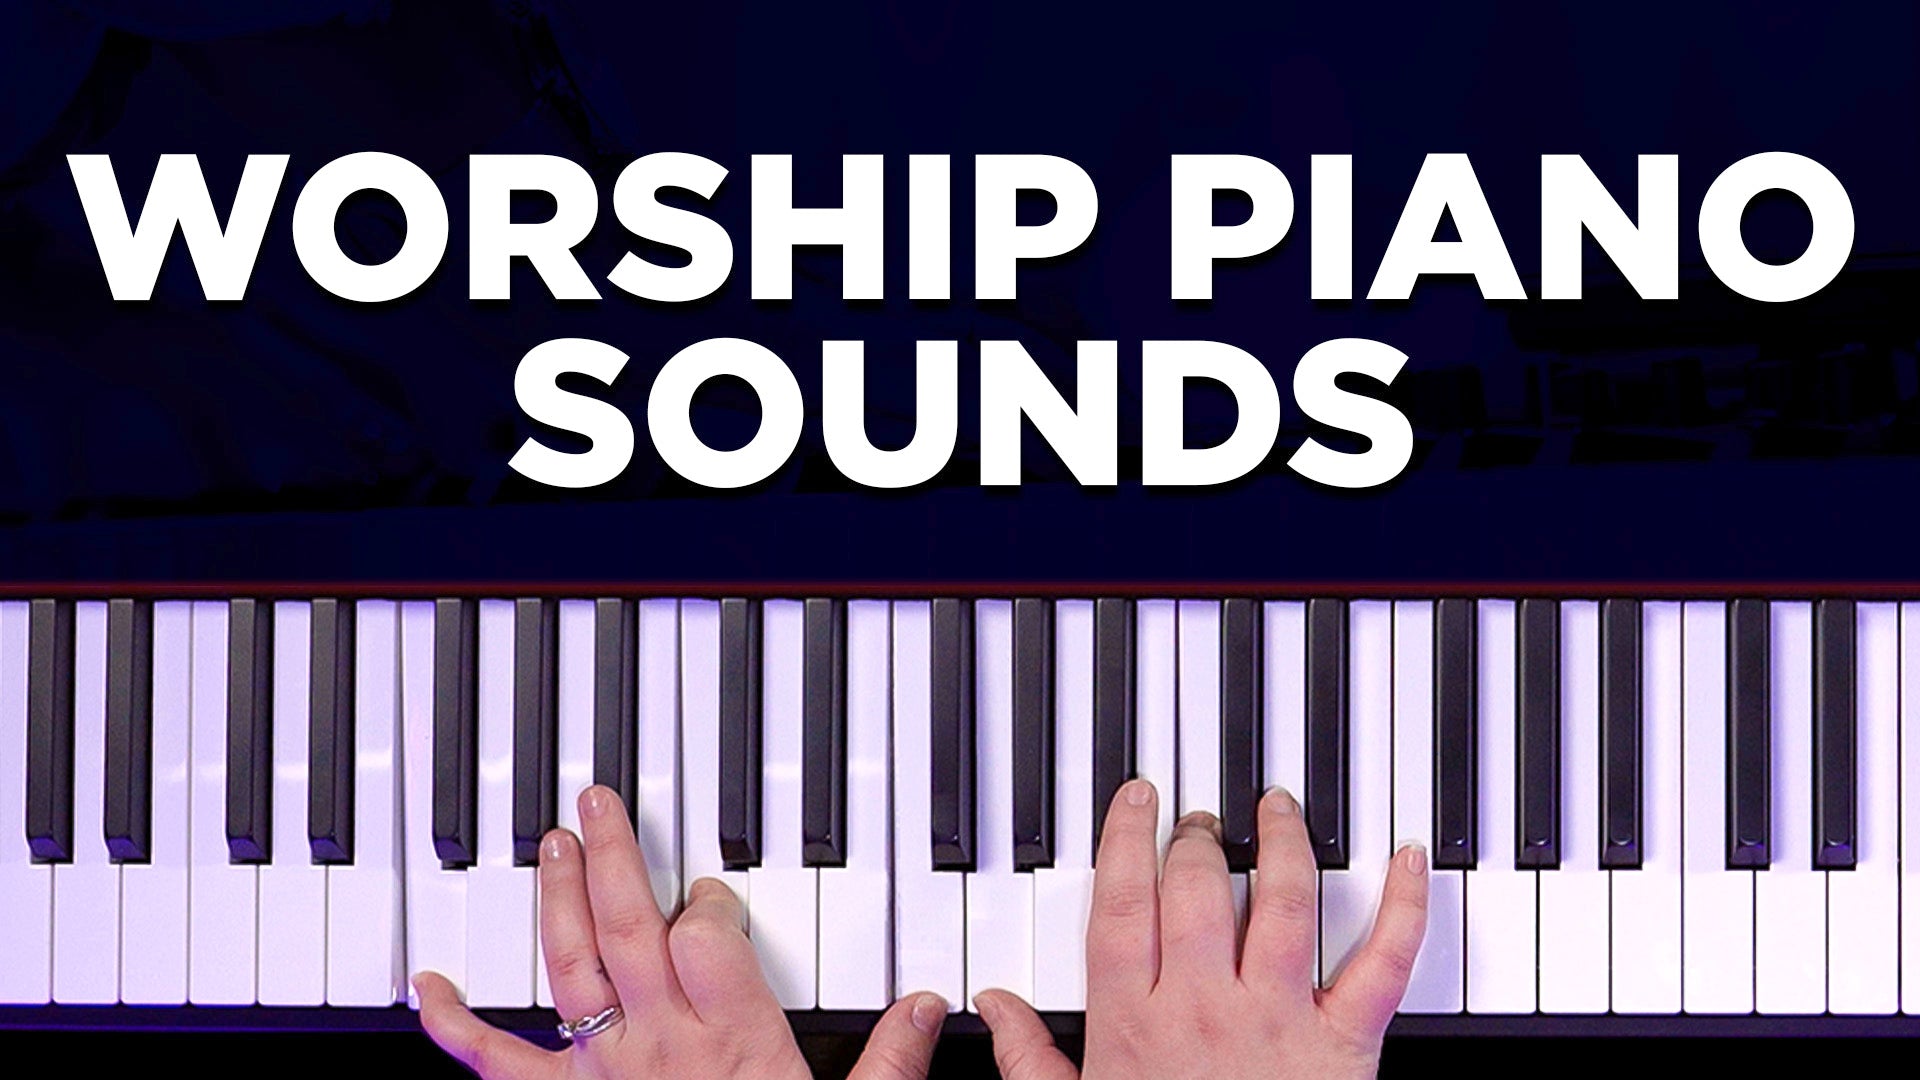 Sounds EVERY Worship Keys Player Should Know